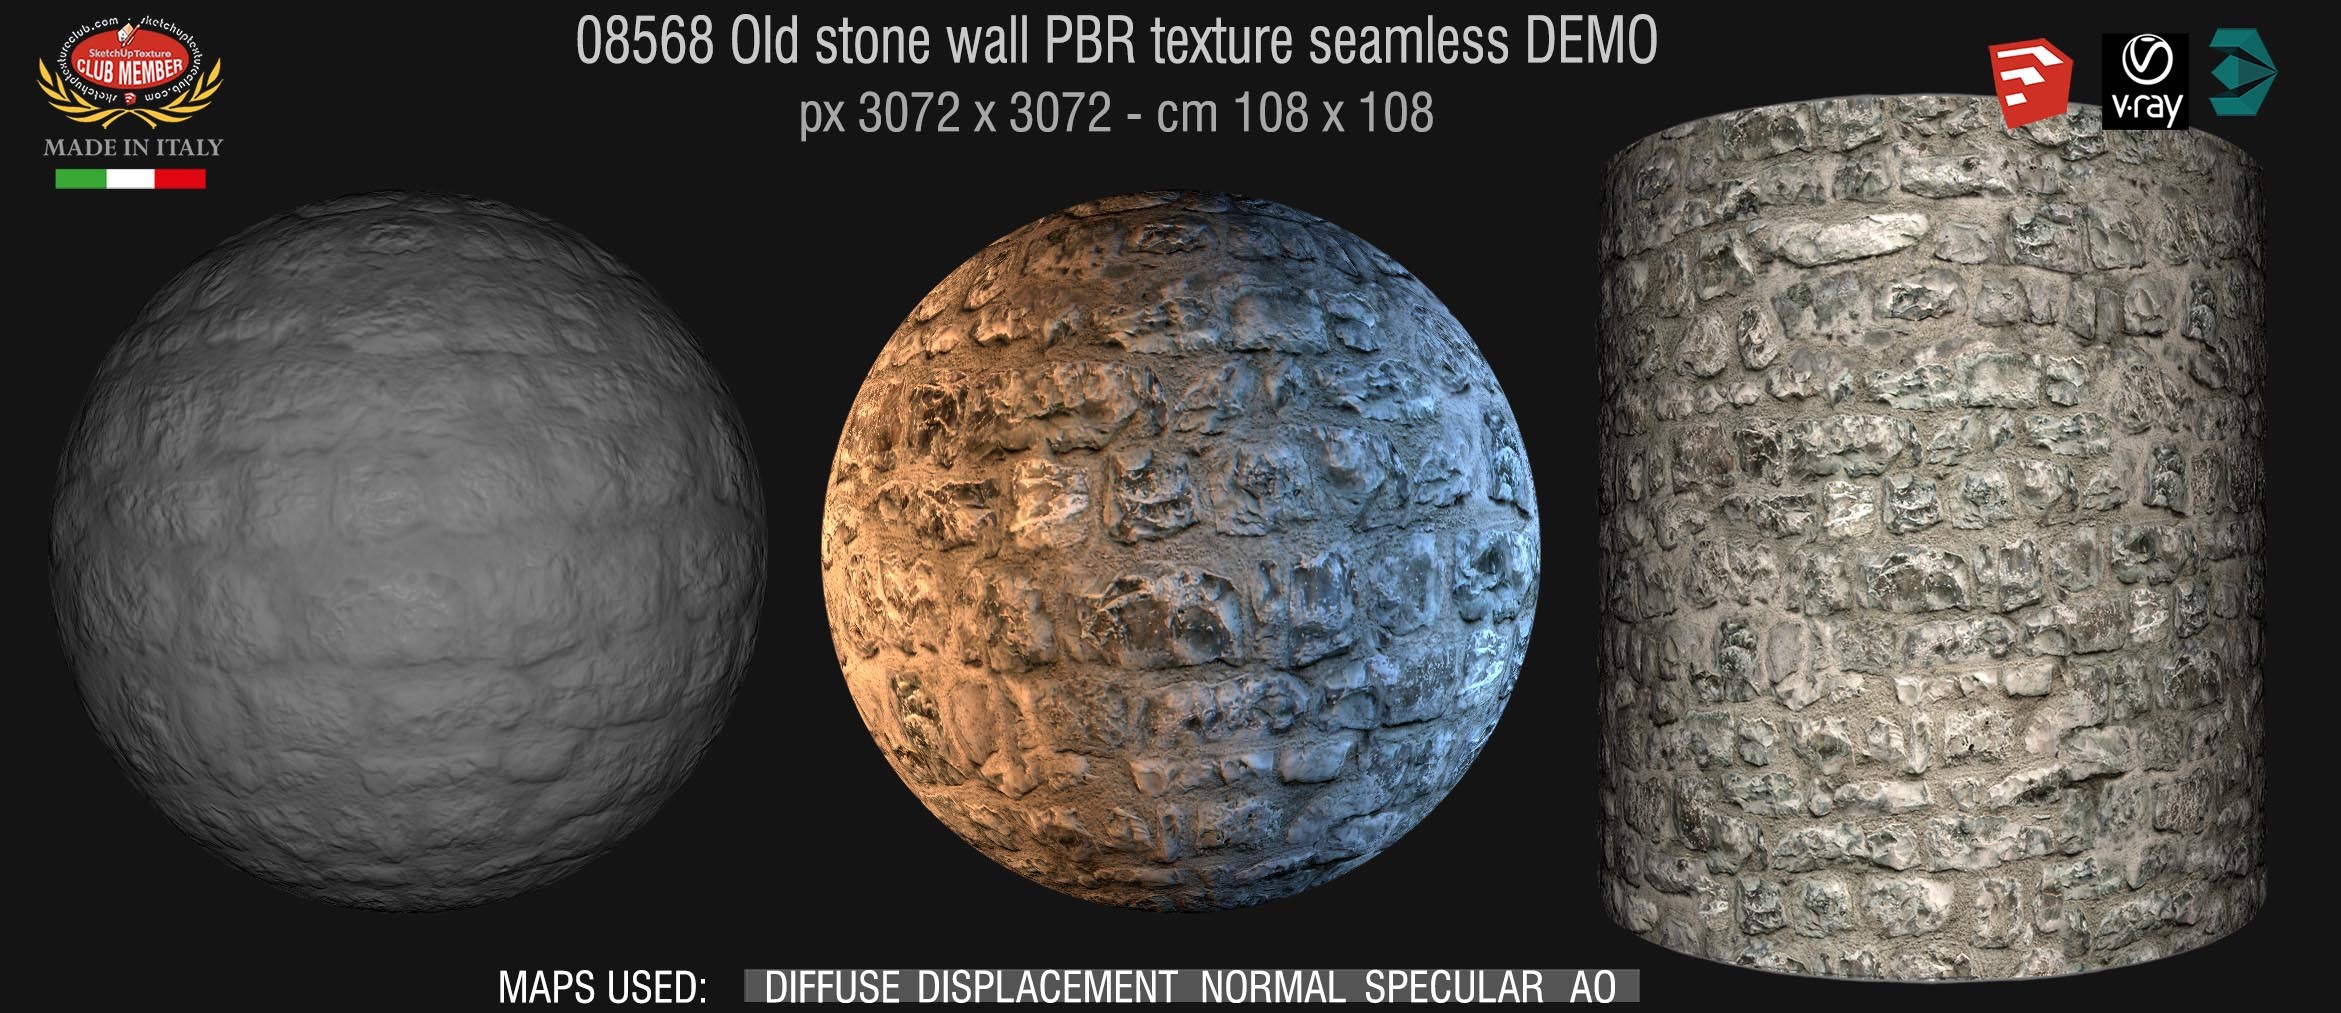 08568 Old stone wall PBR texture seamless DEMO